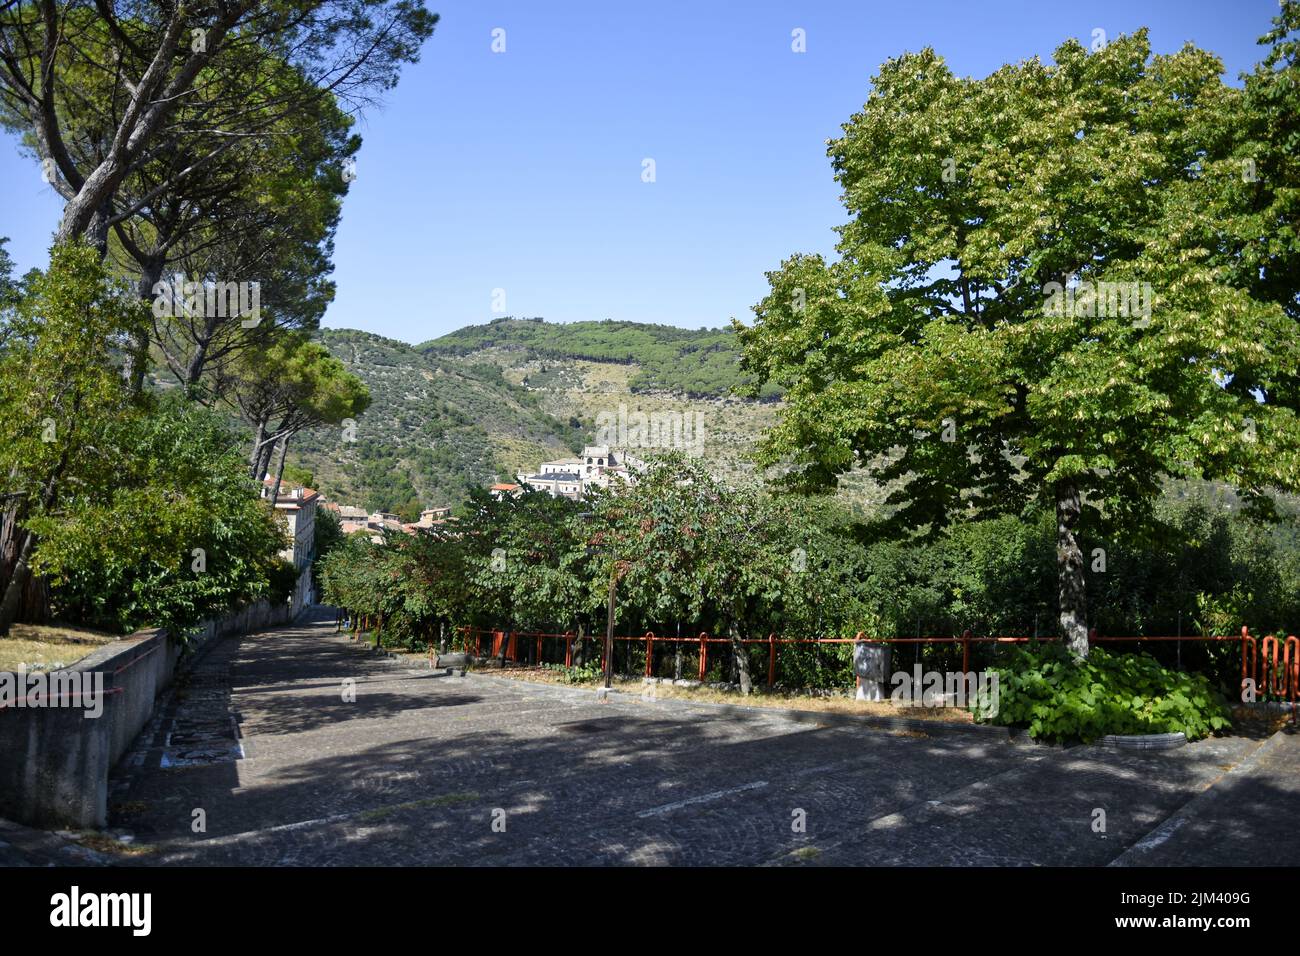 The view of Lenola, a medieval village in the mountains of the Lazio region, Italy. Stock Photo